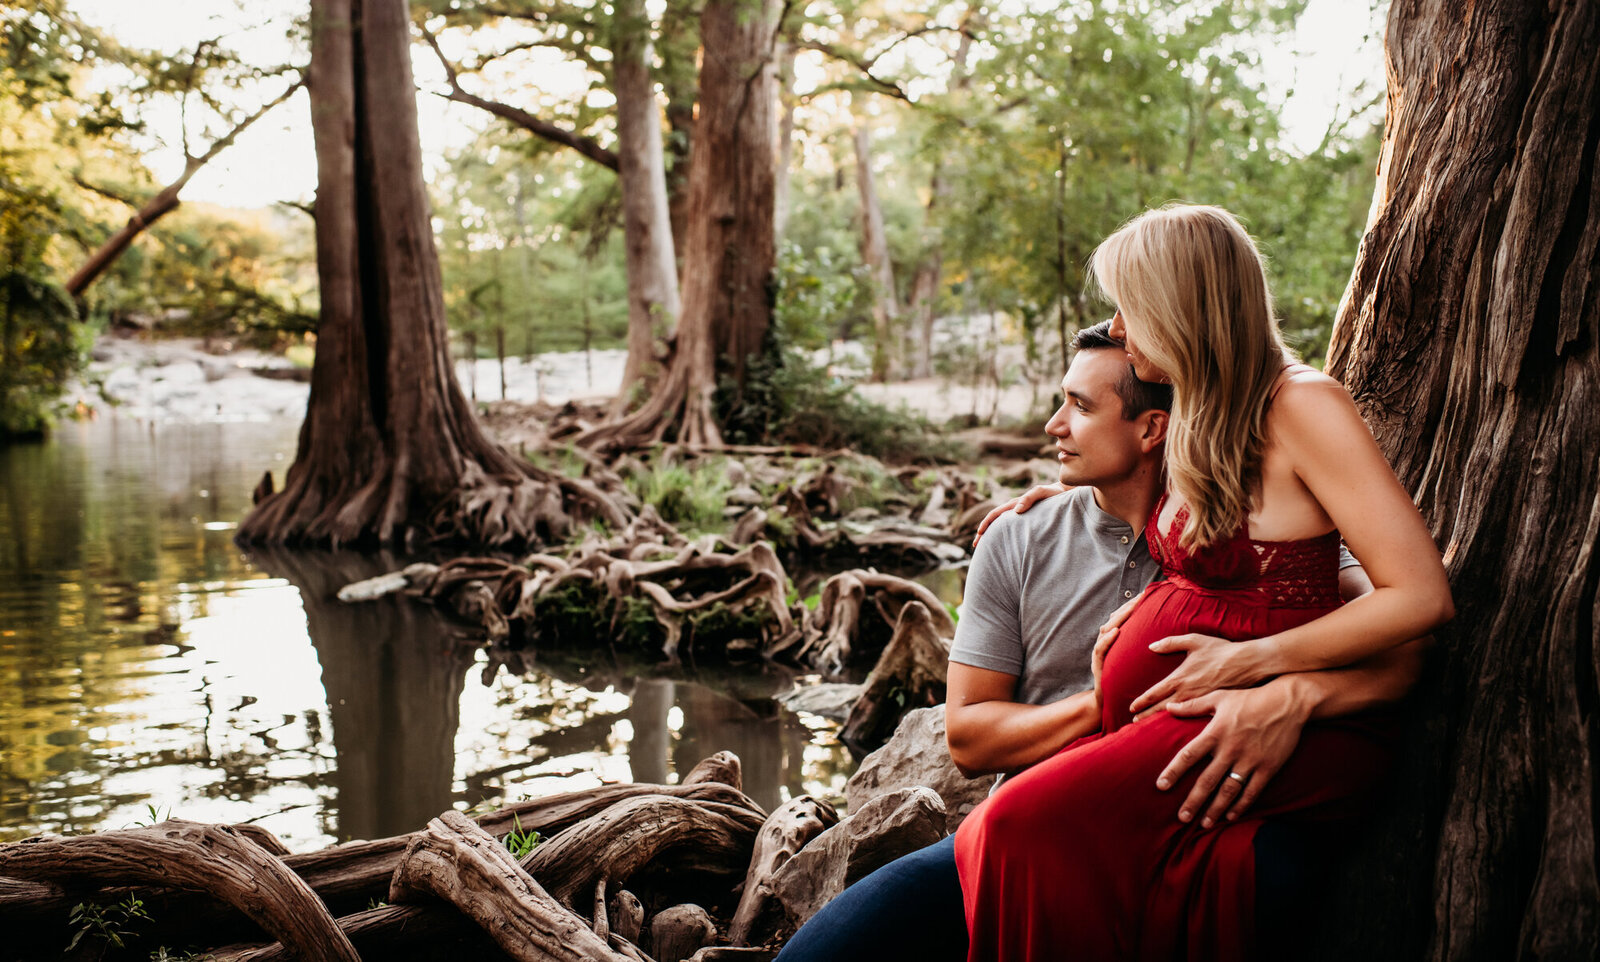 Maternity Photographer, Pregnant woman in a red dress leaning against a tree while she is sitting on a man's lap in a gray t shirt. They are next to a creek and Cypress trees.